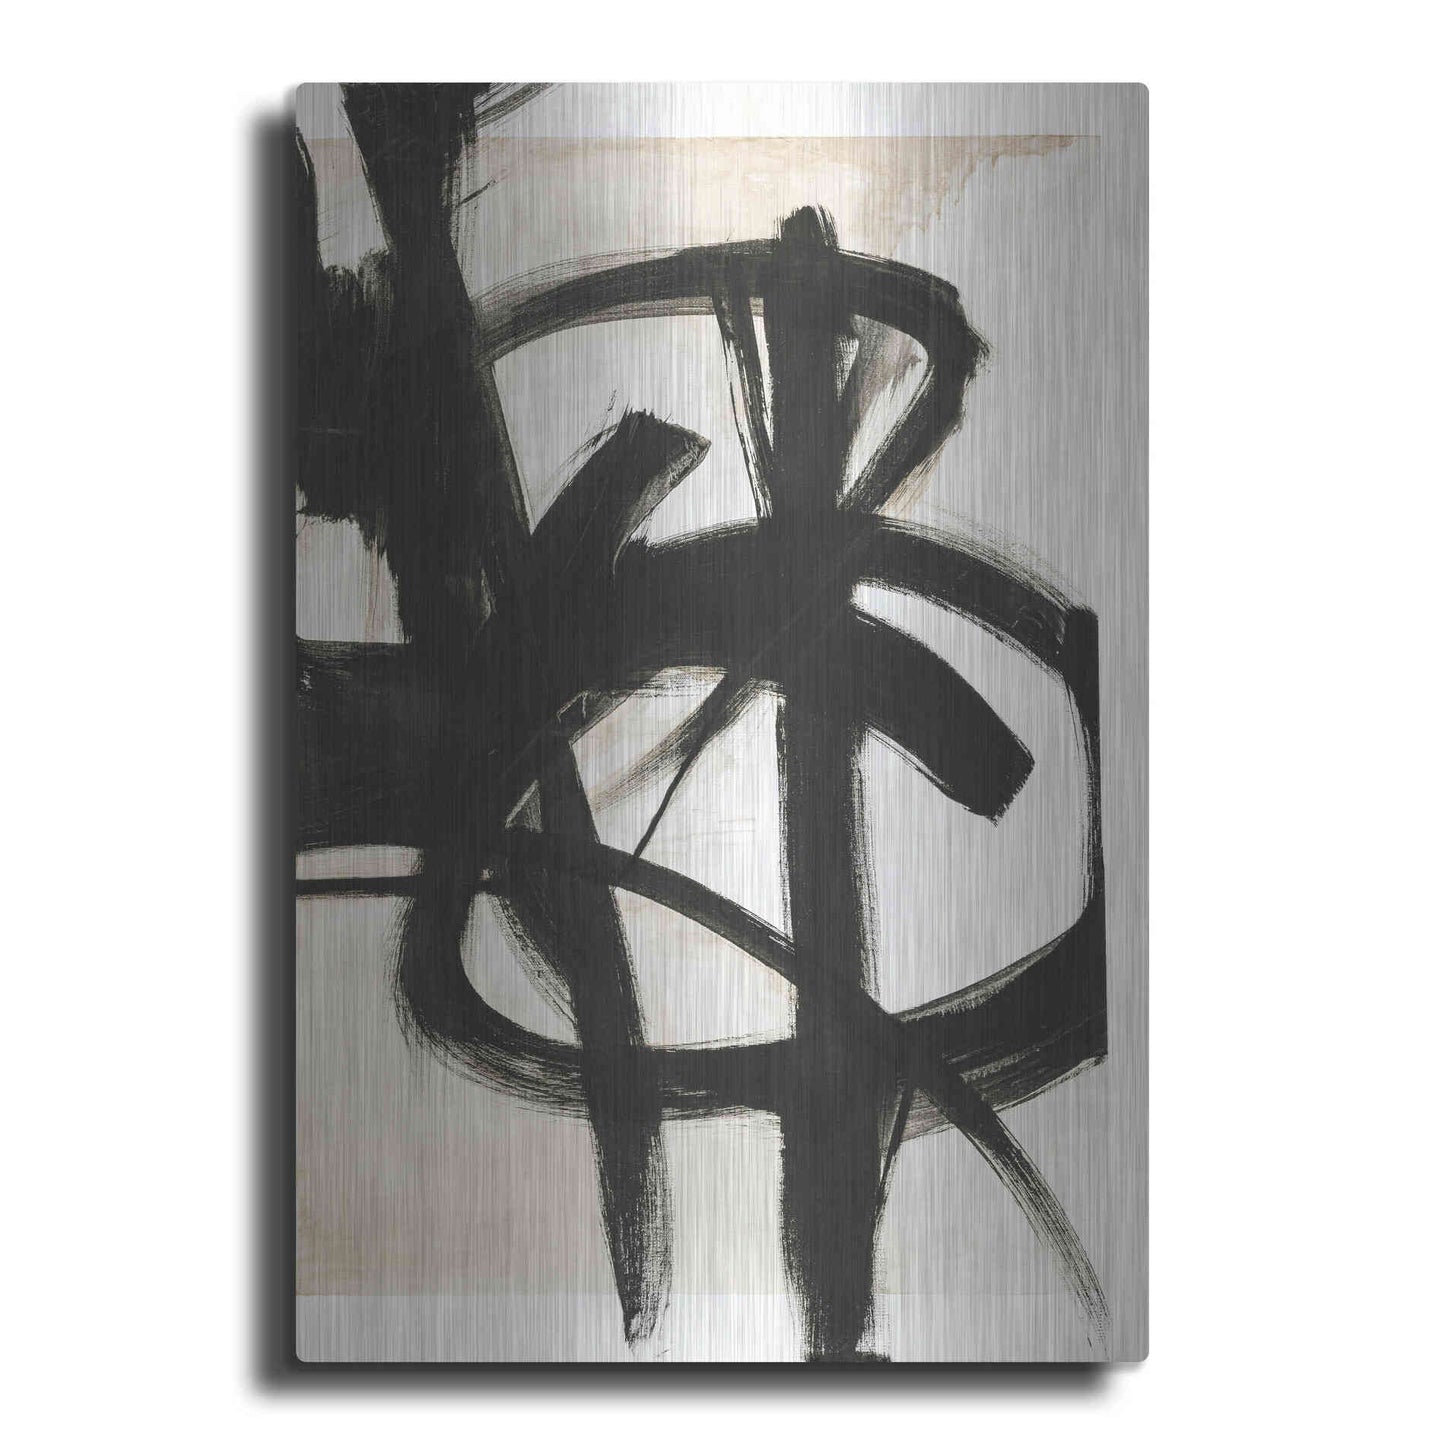 Luxe Metal Art 'Graphical Shapes 7' by Design Fabrikken, Metal Wall Art